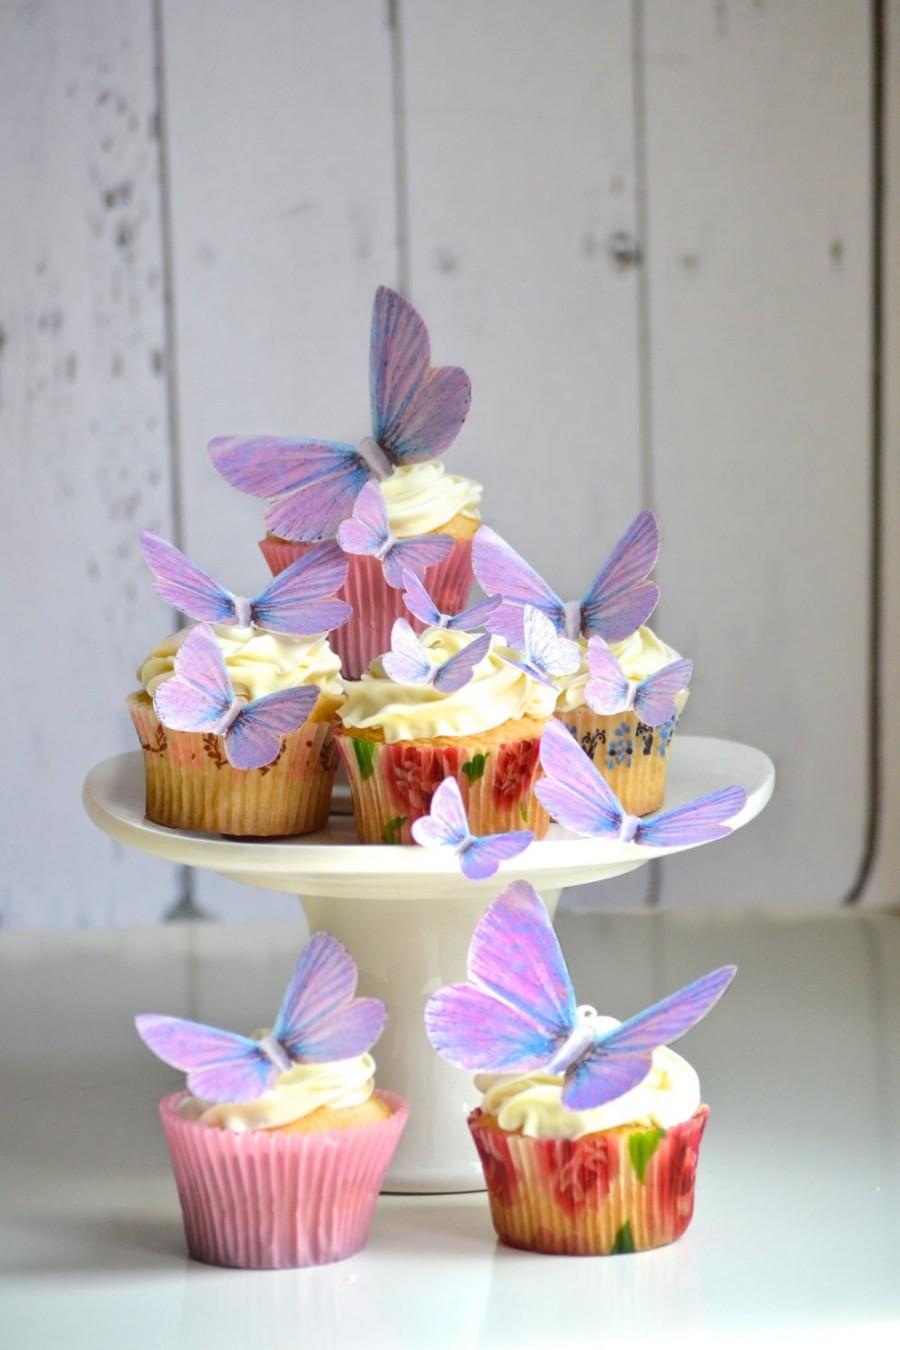 Hochzeit - Wedding Cake Topper Edible Butterflies in Lavender - Cake & Cupcake toppers - Food decorations - Edible Wedding Favor